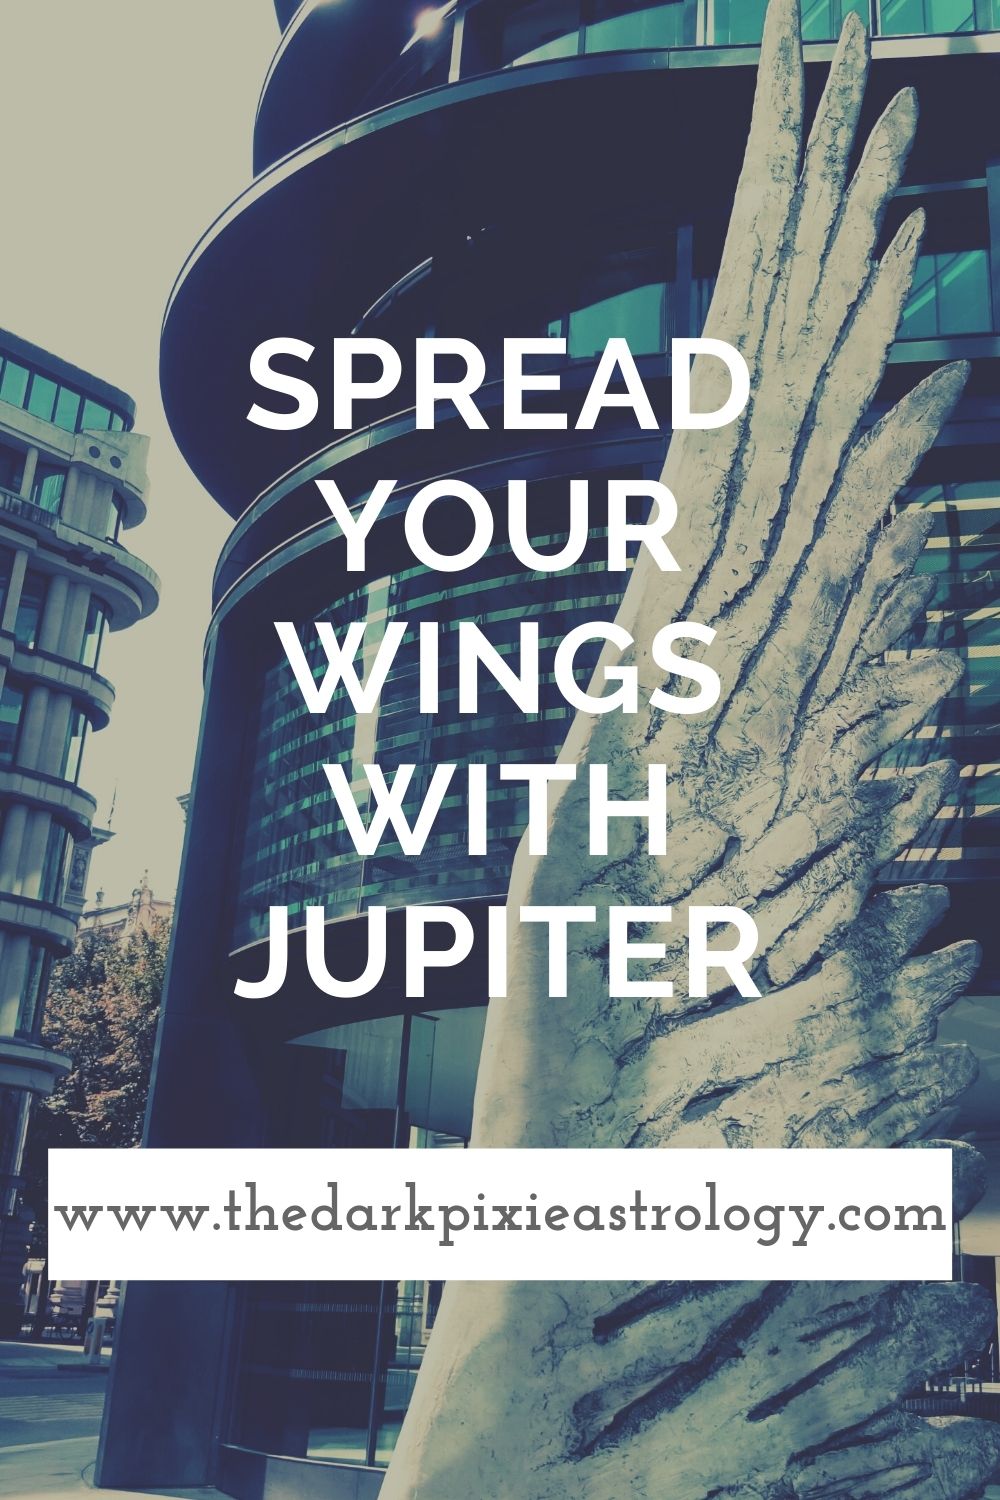 Spread Your Wings With Jupiter by Regina Chouza for The Dark Pixie Astrology